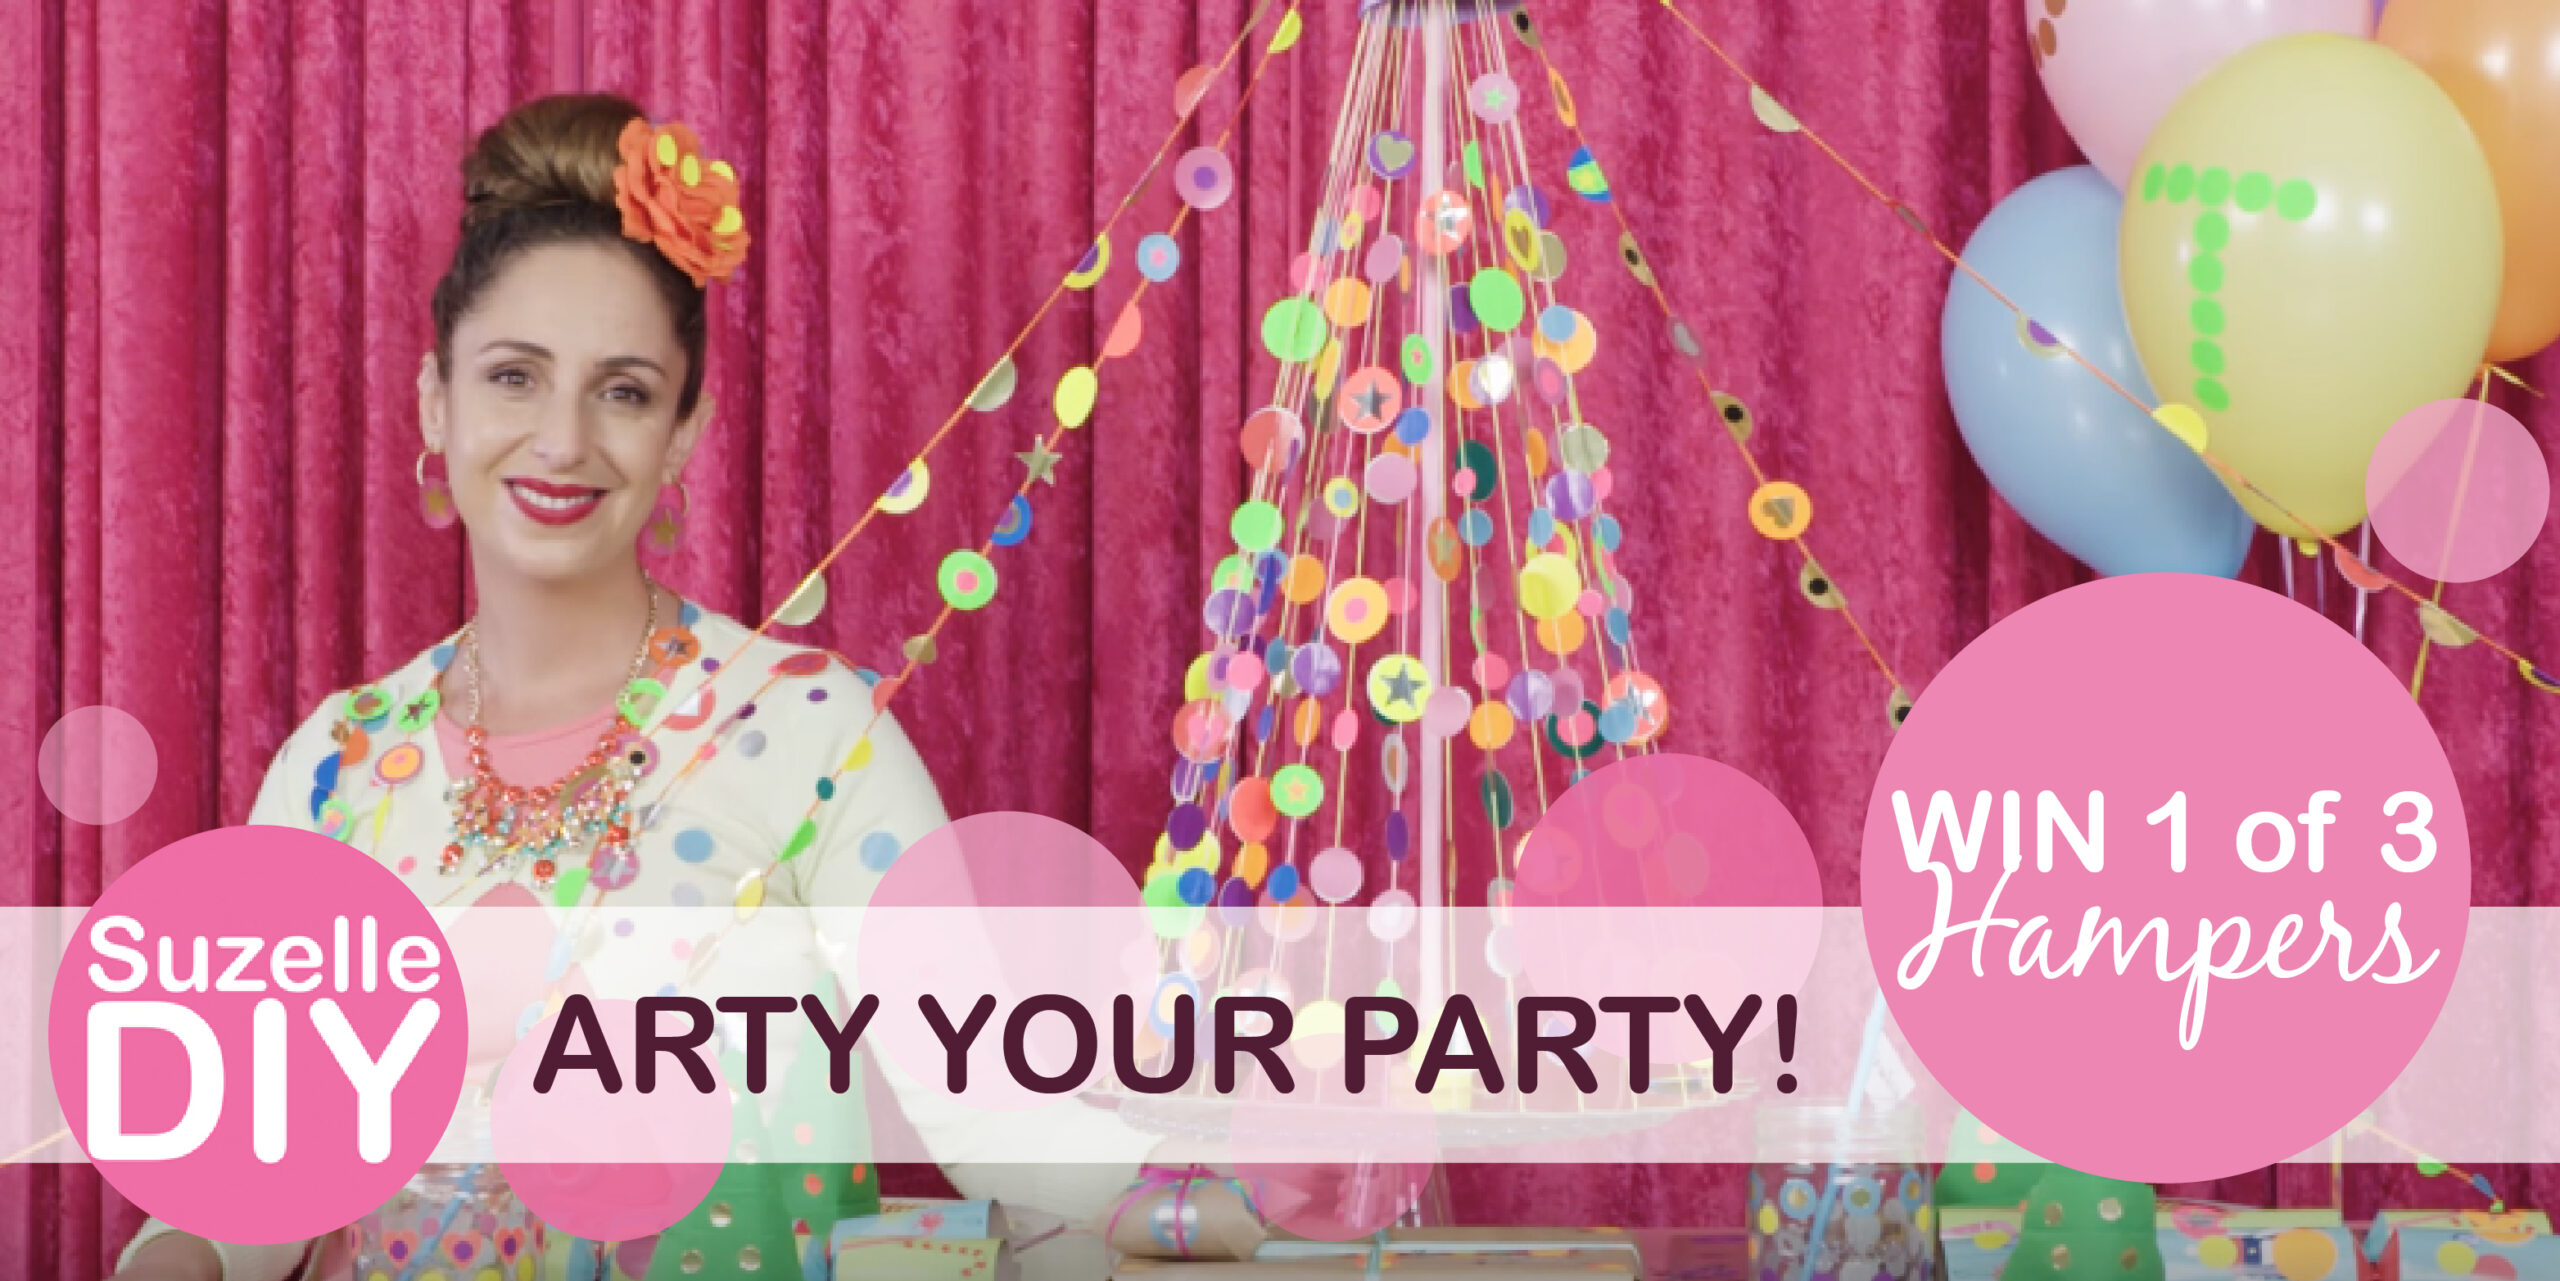 Arty your Party with TOWER labels! Win 1 of 3 hampers.